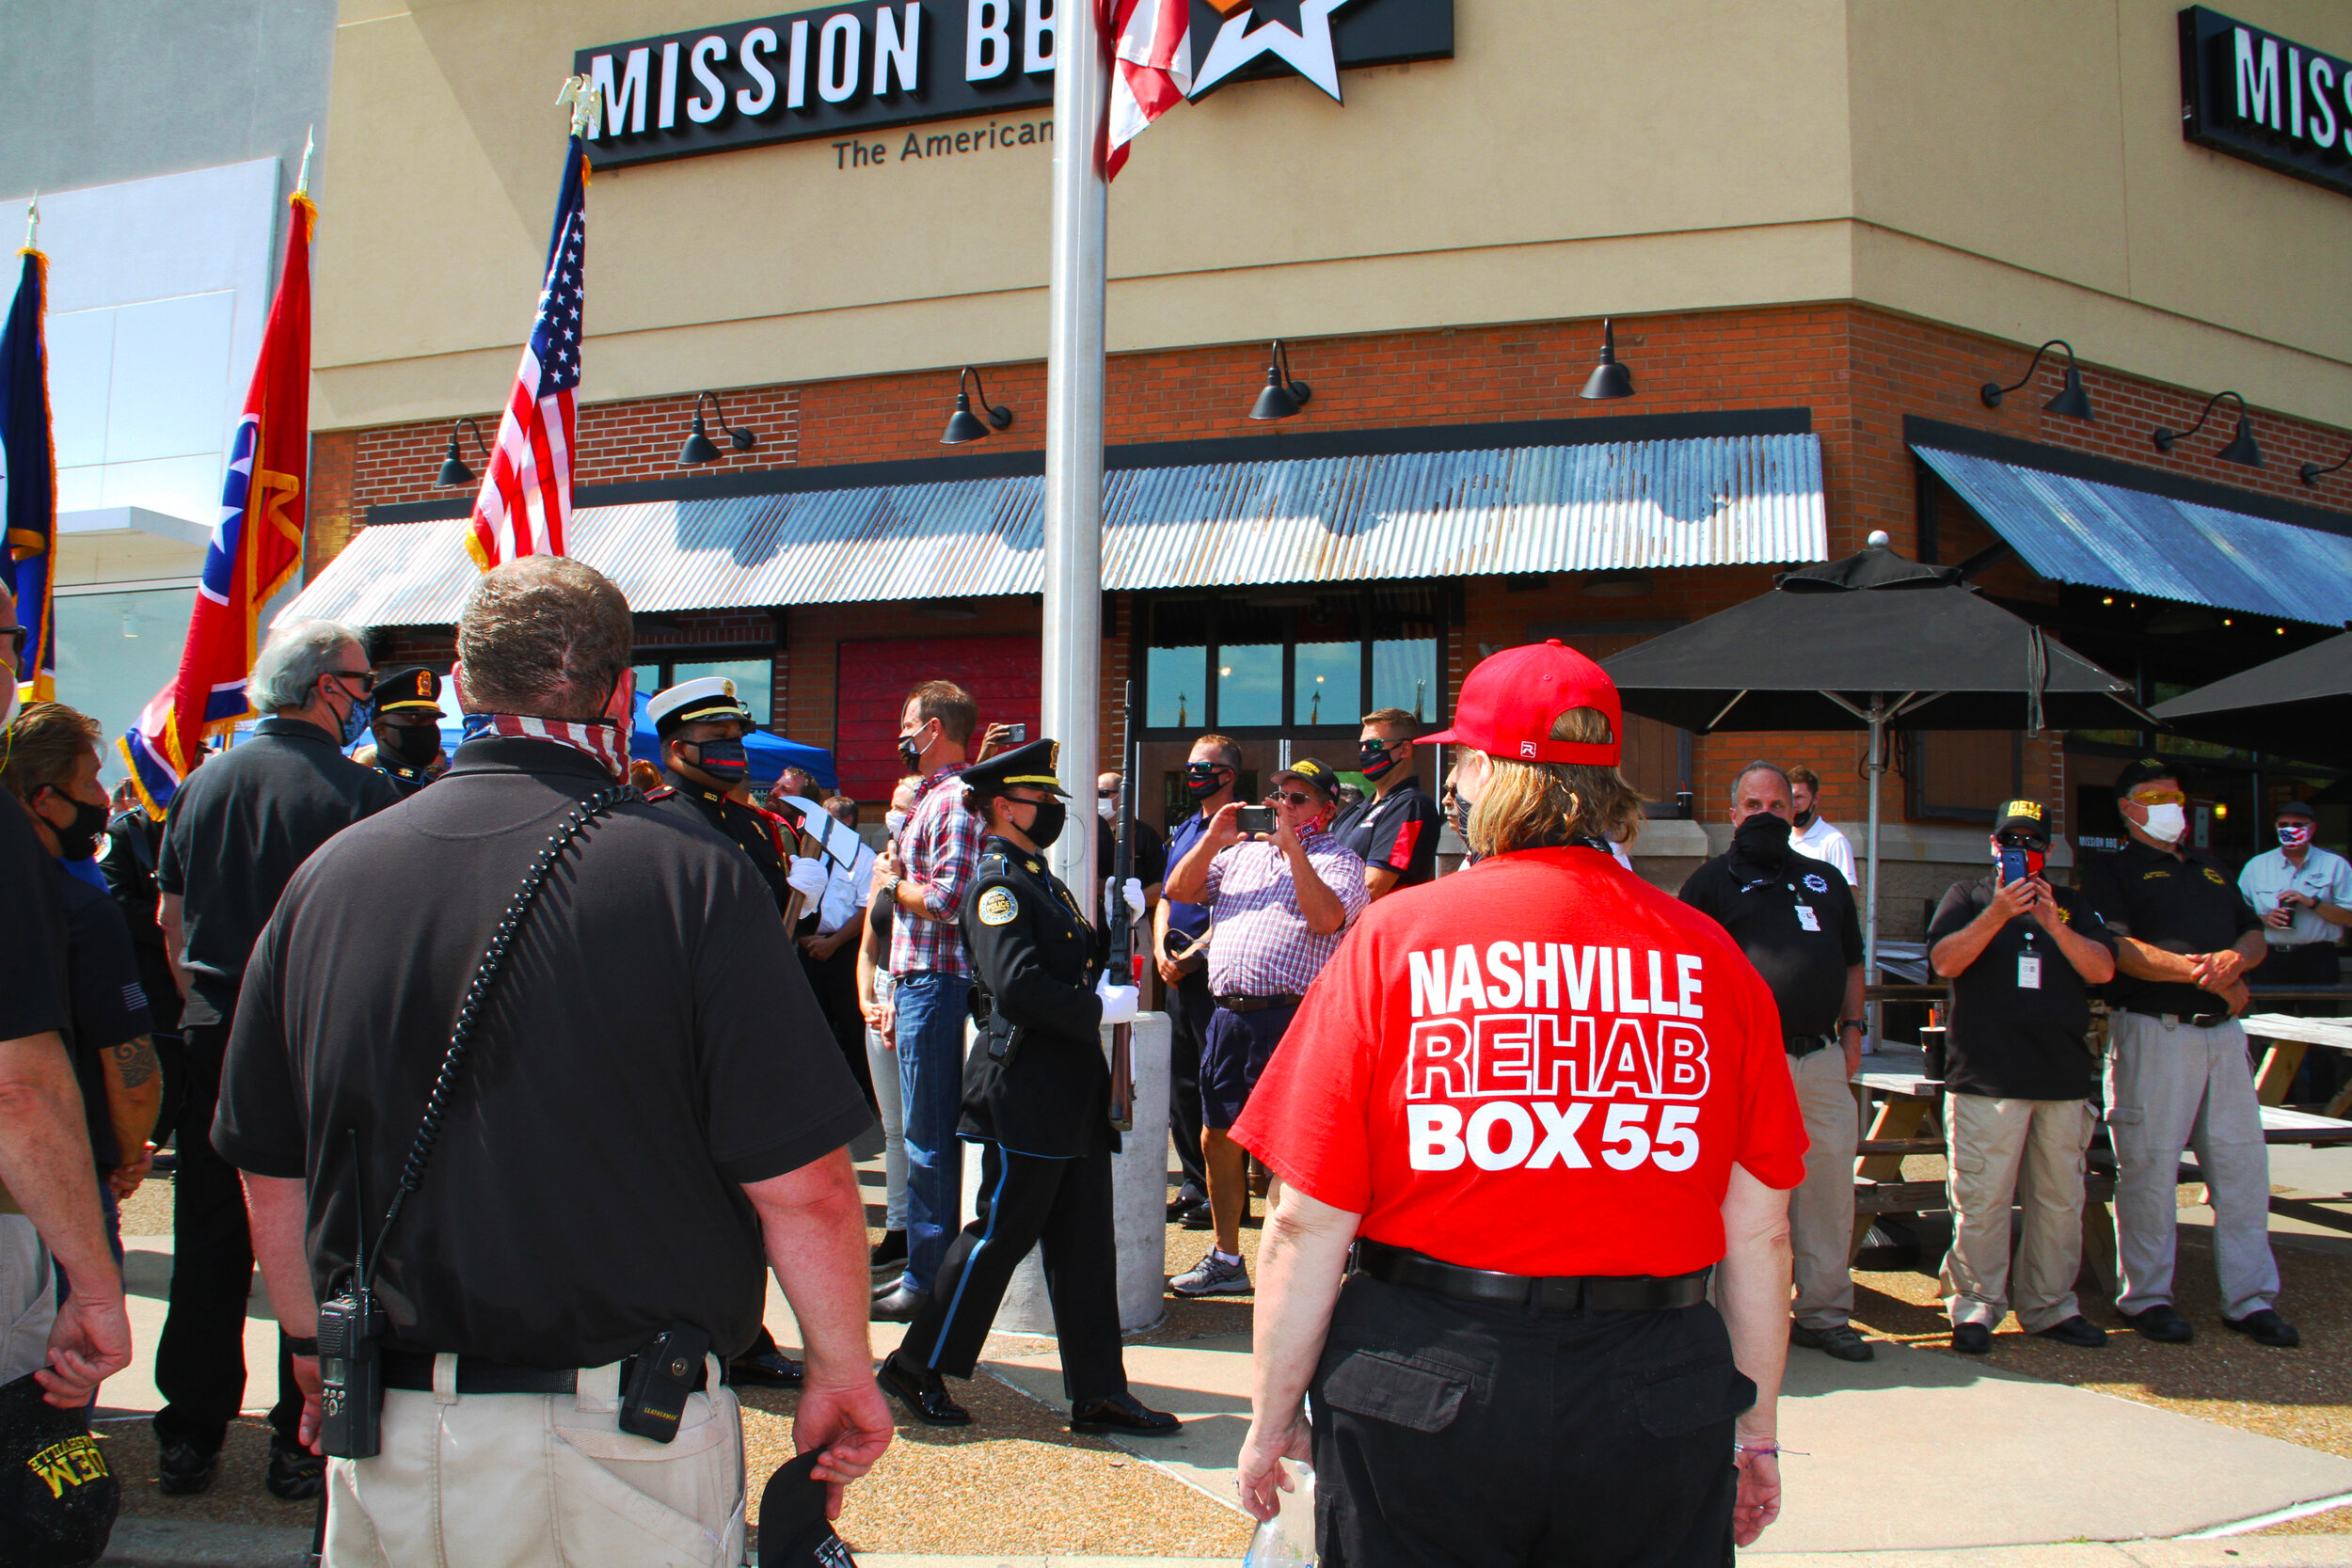  2020 9/11 Tribute Mission BBQ Nashville – 9/11 REMEMBERED 2020 – Photo: Cierra Mazzola – All Rights Reserved 